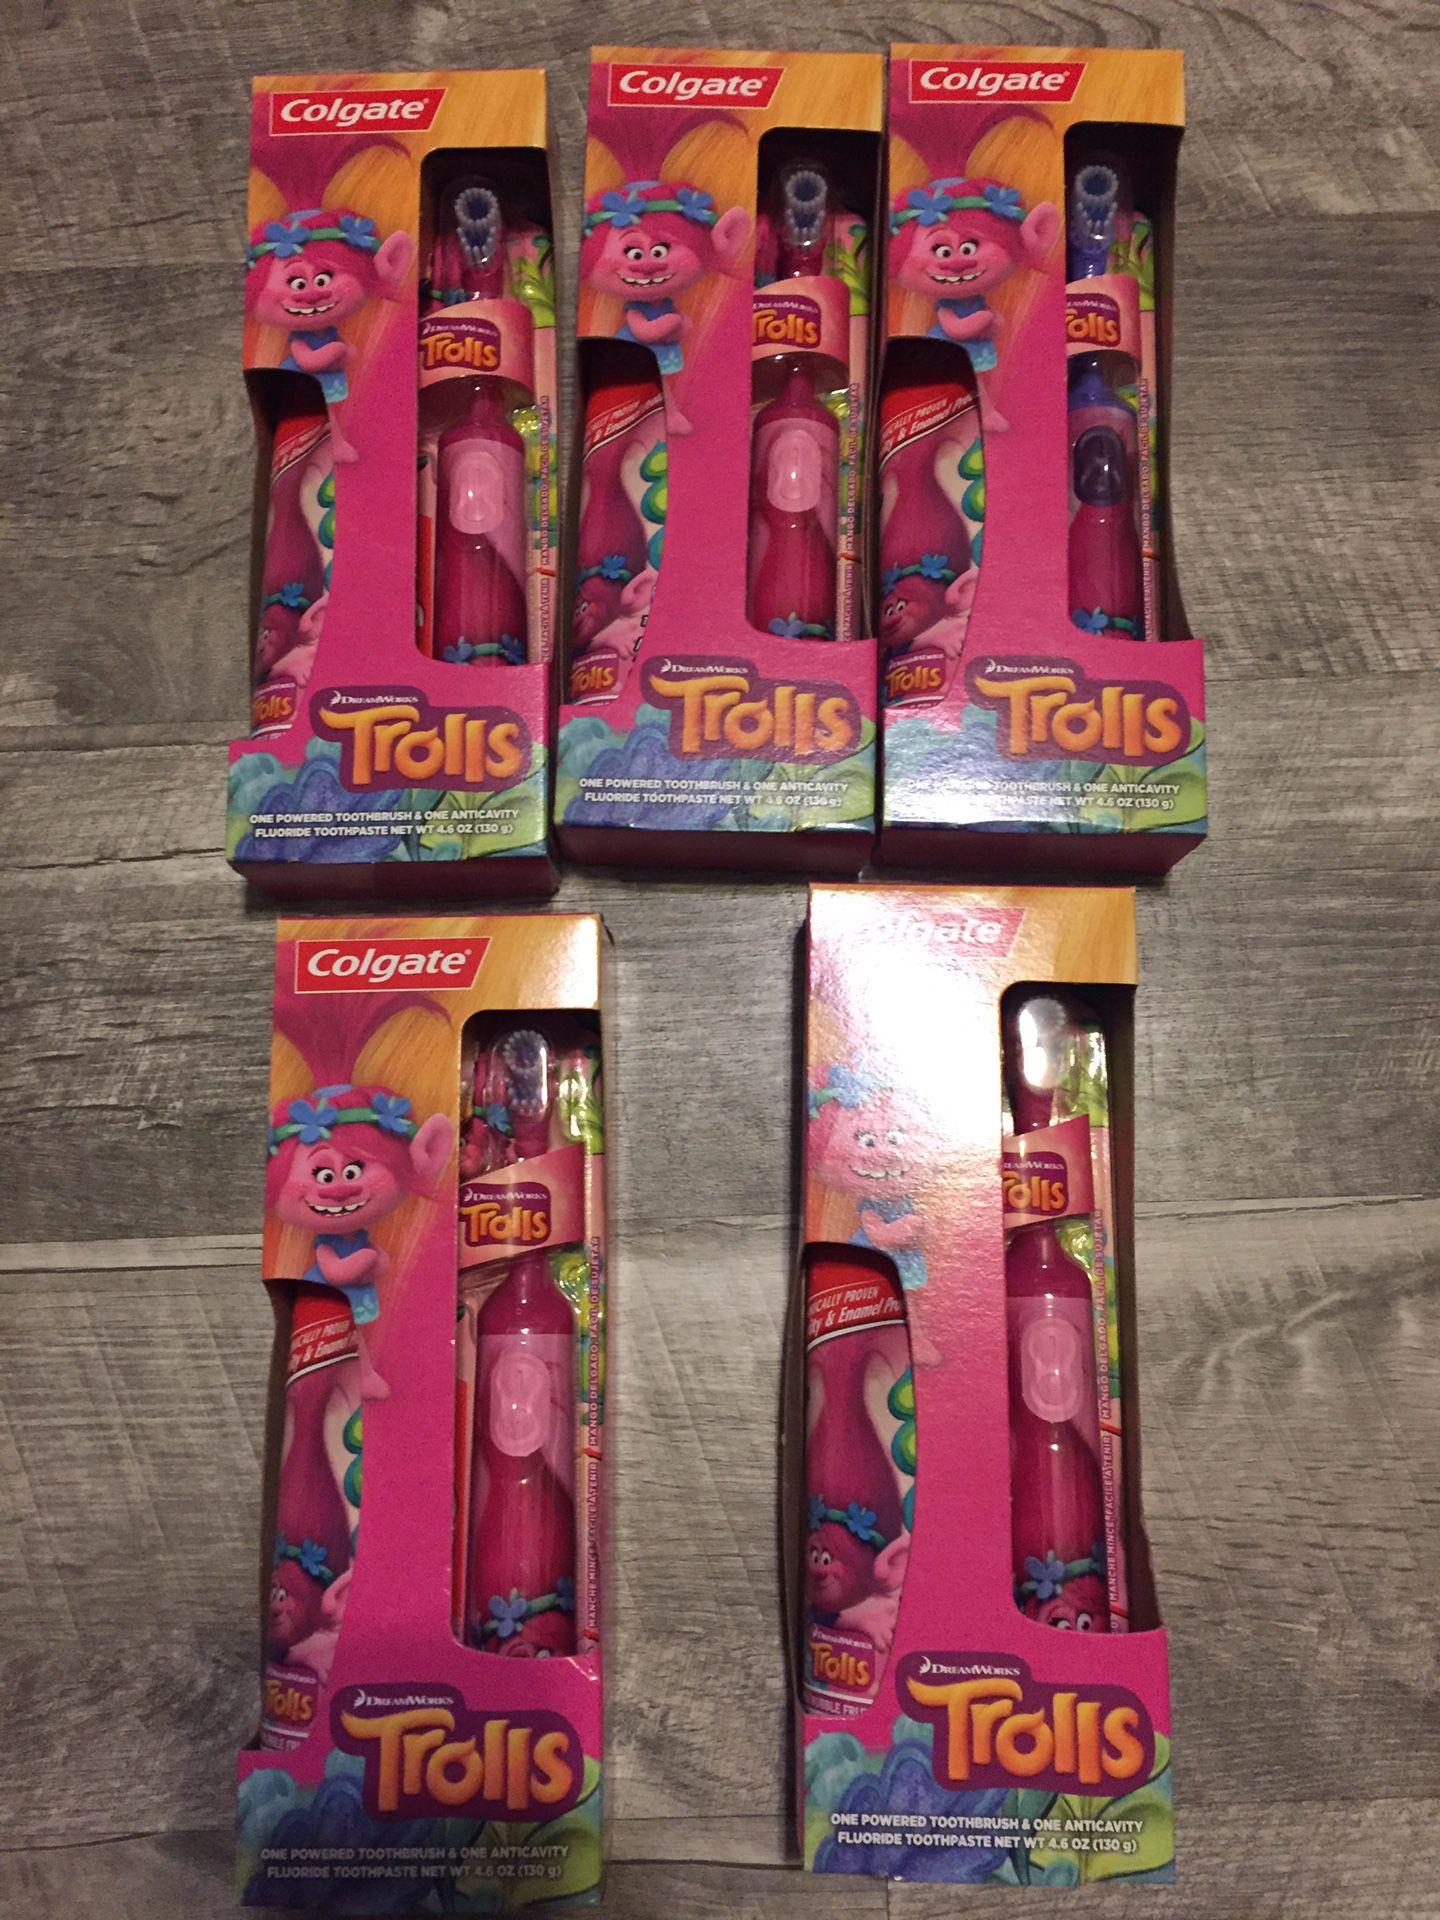 Trolls Powered toothbrush with toothpaste $4:50 a pack Firm price pick up Gahanna